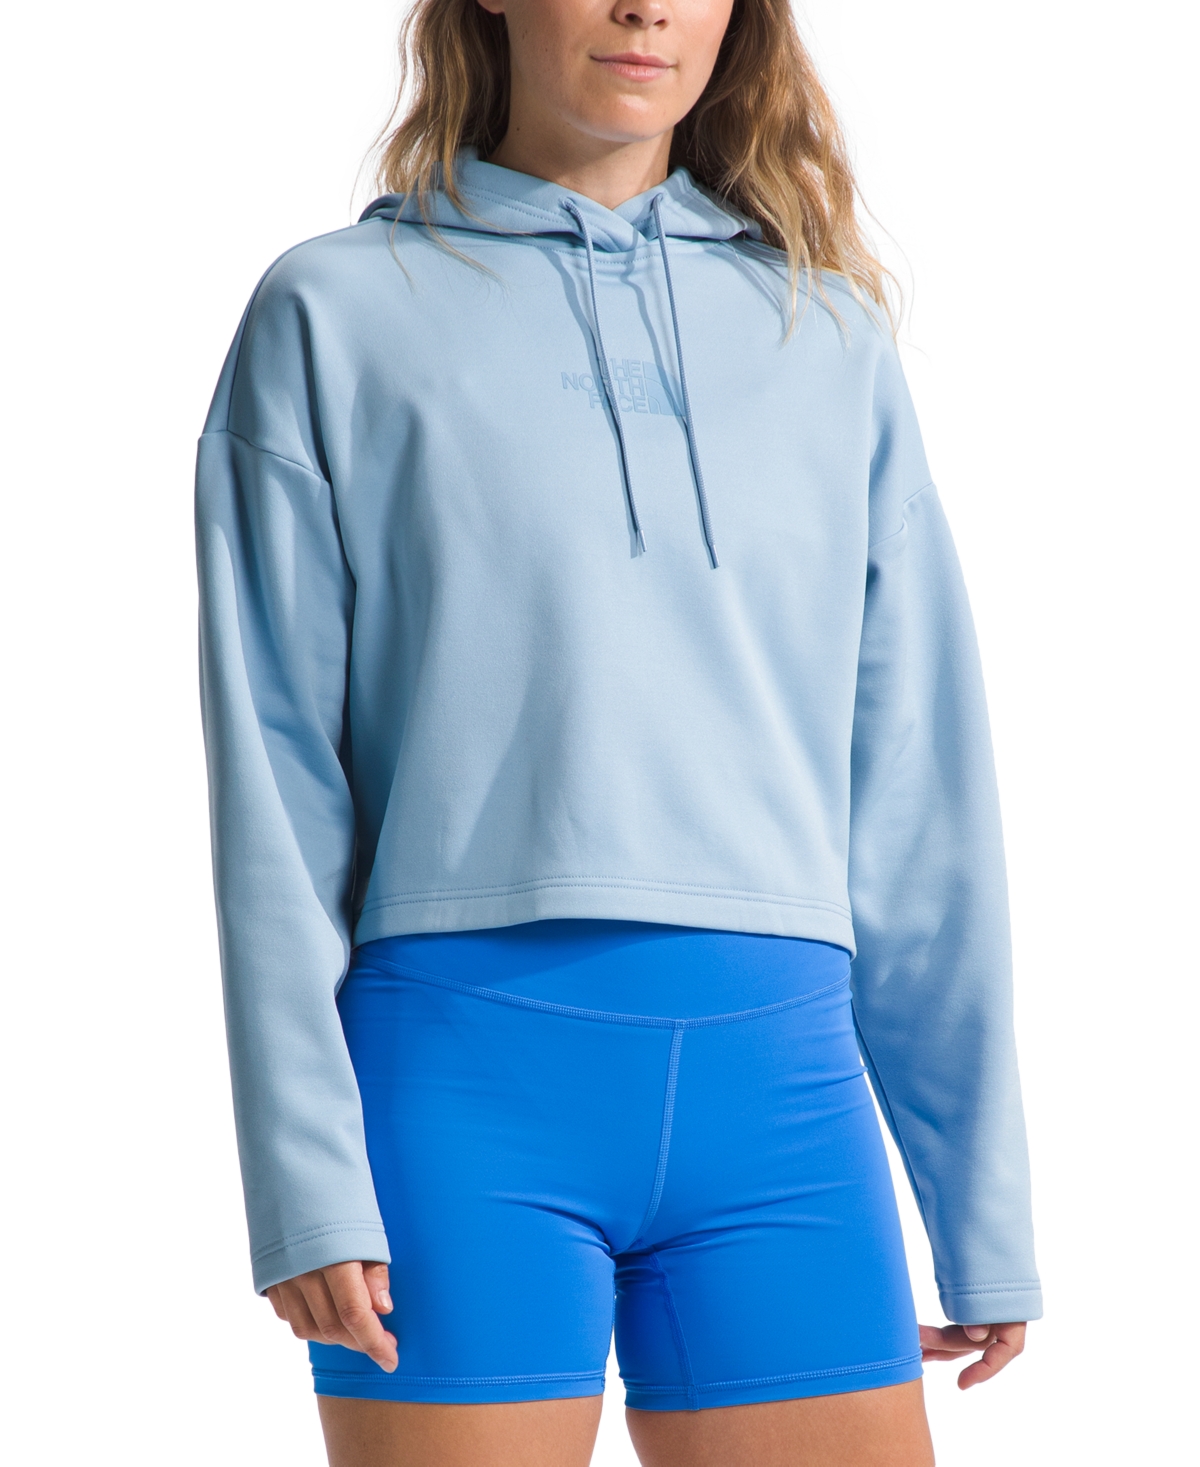 THE NORTH FACE WOMEN'S HORIZON PERFORMANCE CROPPED HOODIE